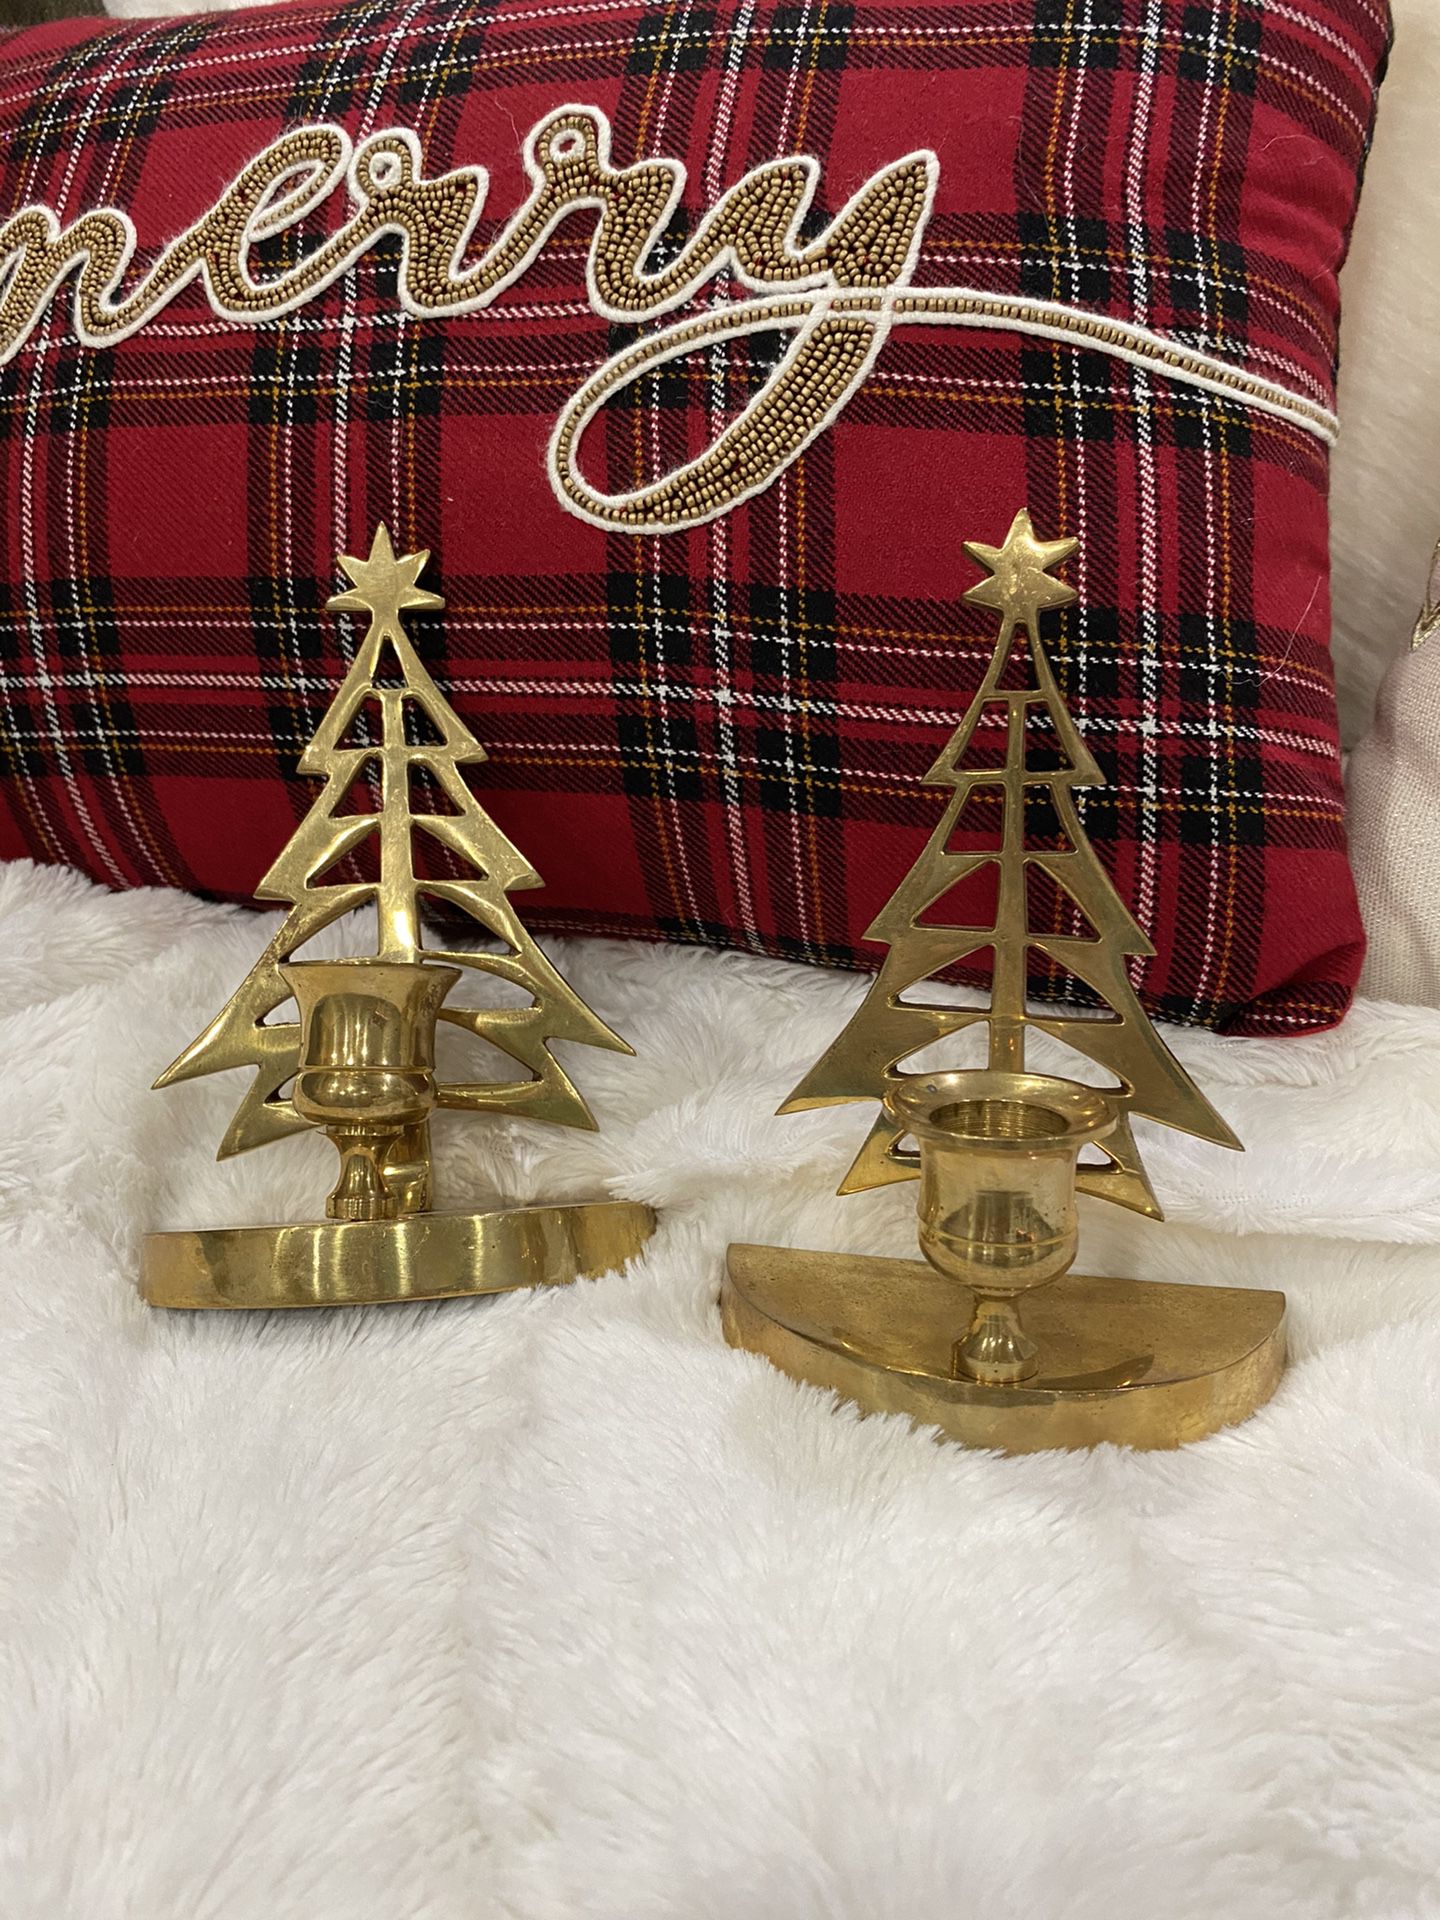 Brass Christmas Tree Candle Holders